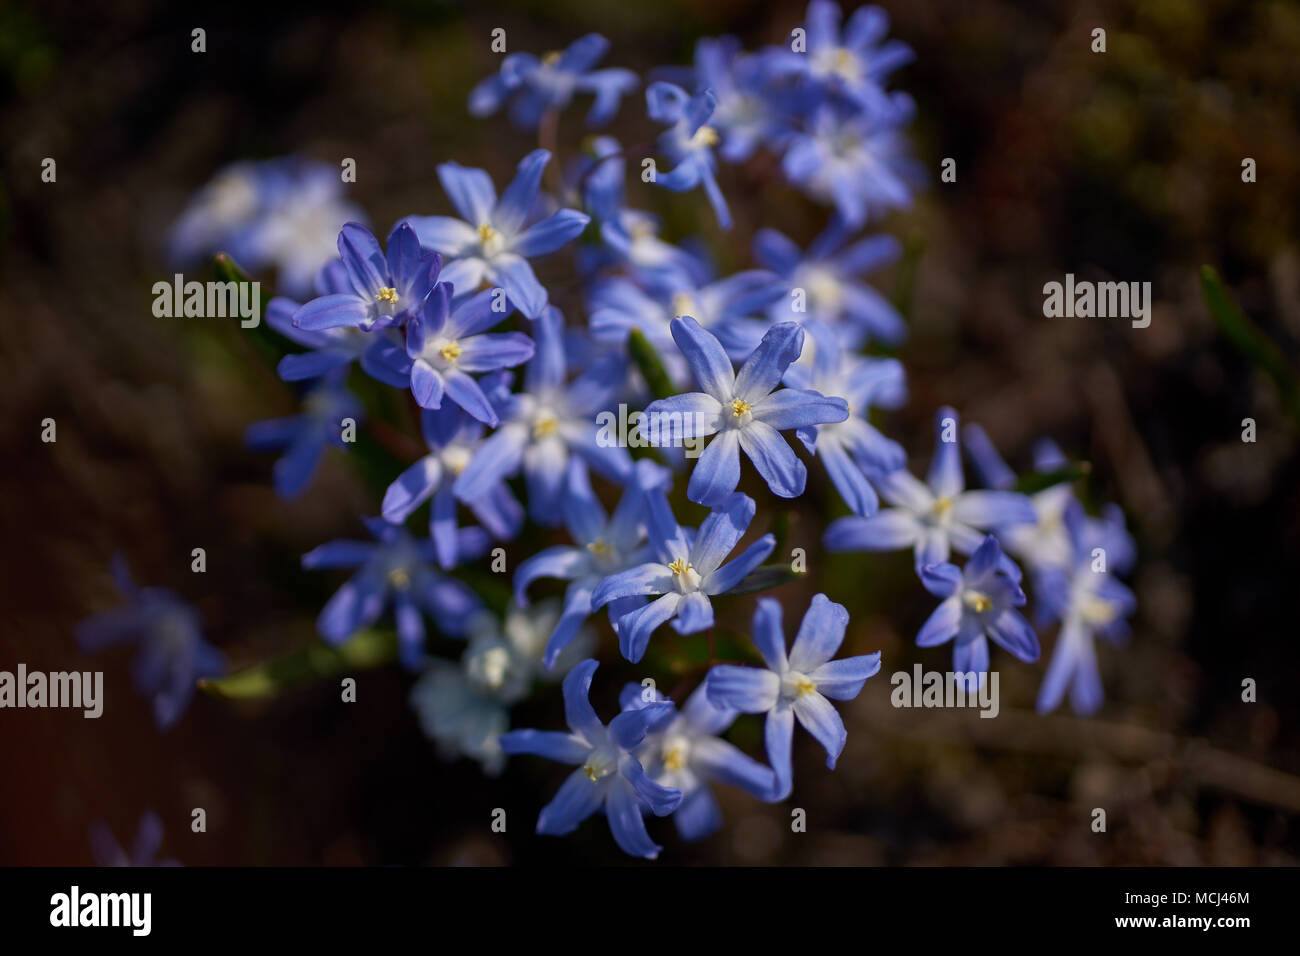 Scilla forbesii flowers Chionodoxa forbesii Forbes' glory-of-the-snow blooming Stock Photo